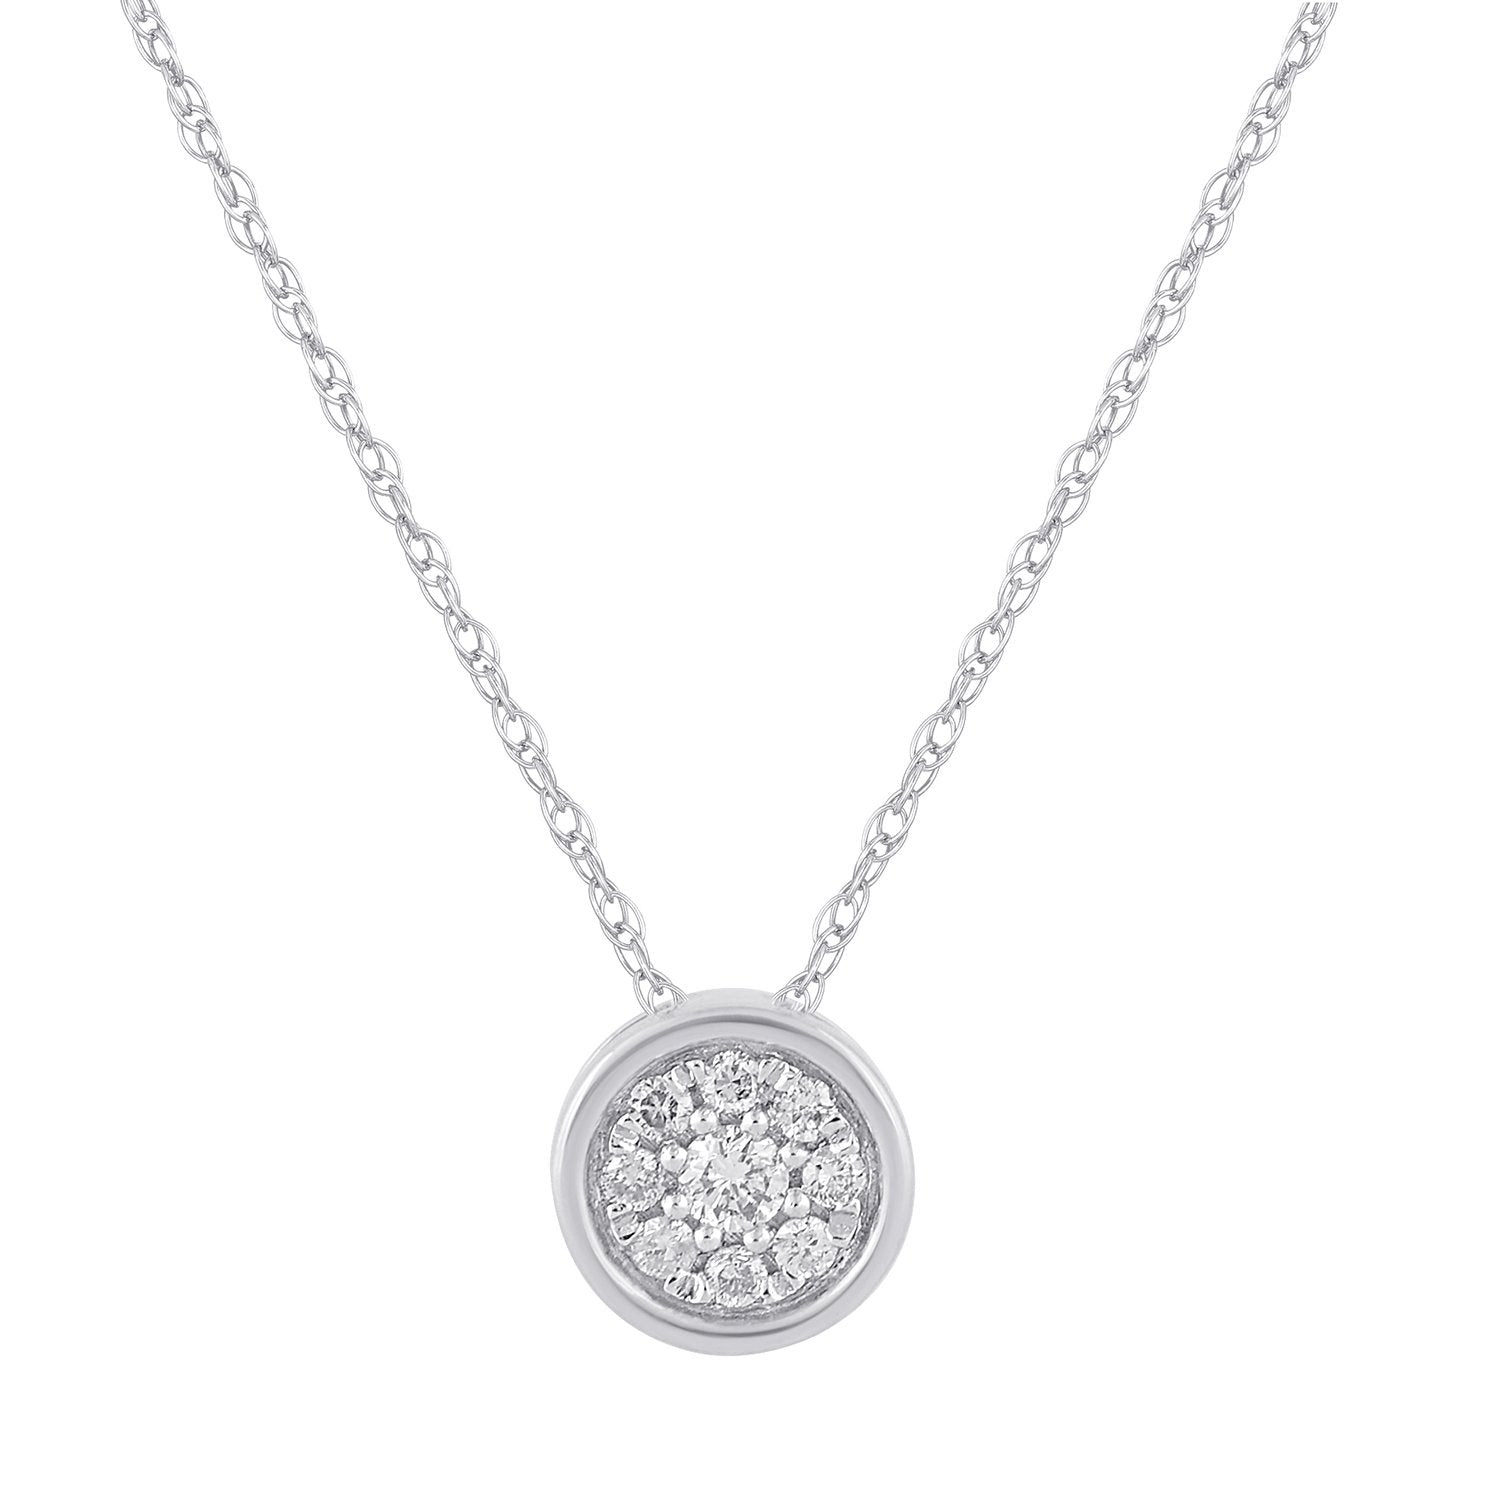 Mirage Surround Necklace with 0.10ct of Diamonds in Sterling Silver Necklaces Bevilles 